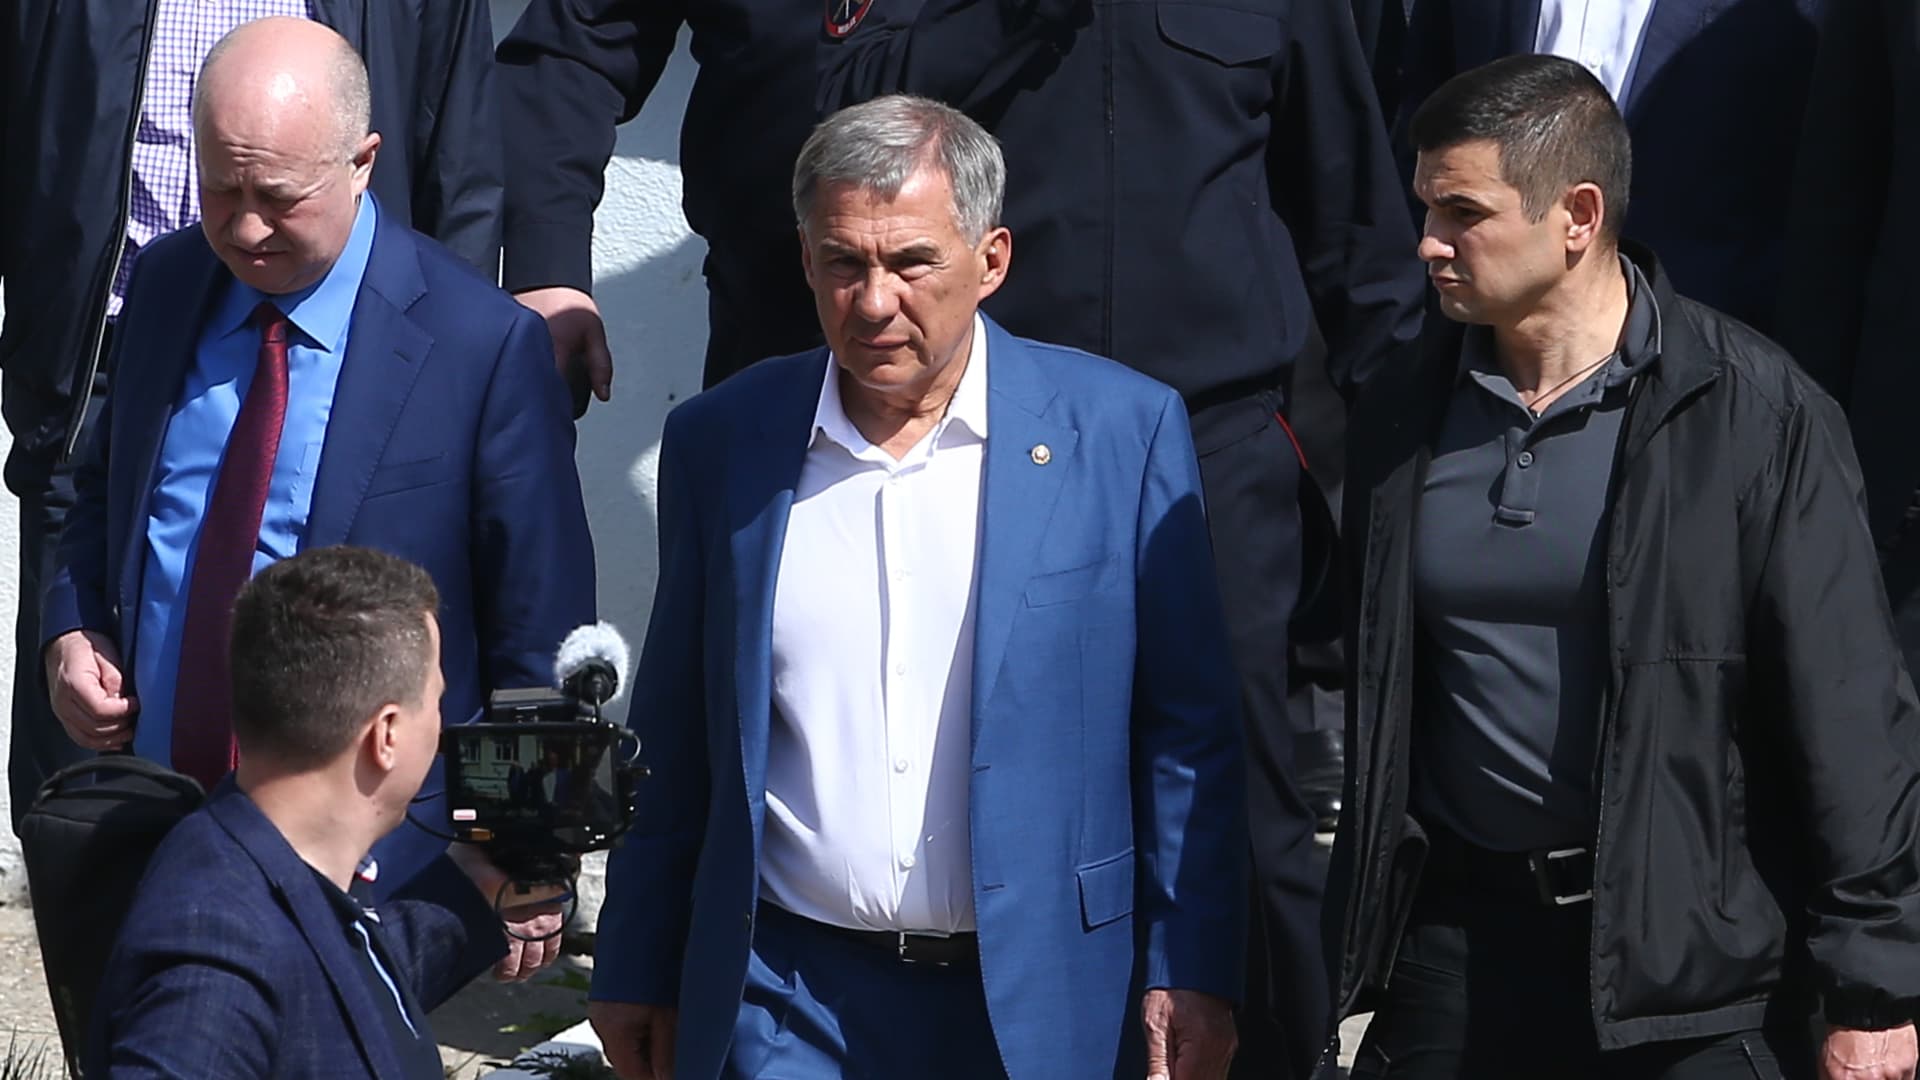 Rustam Minnikhanov, president of the Republic of Tatarstan, arrives at school No 175 where a shooting ha taken place; the number of dead is uncertain.